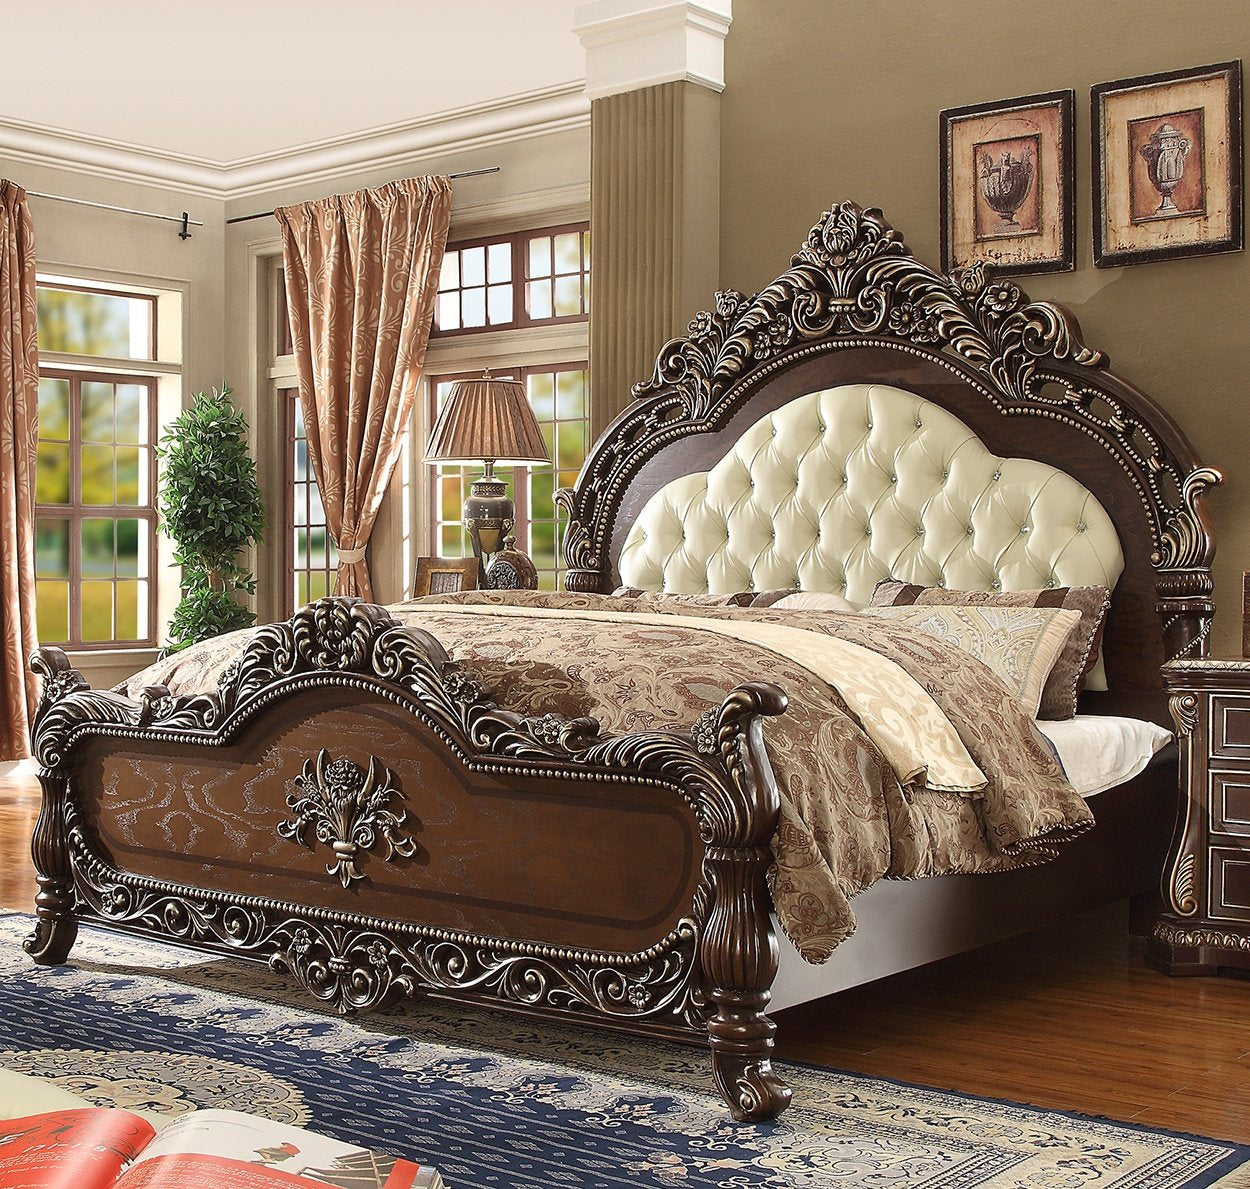 Leather Eastern King Bed in Brown Cherry Finish 8013EKBED European Victorian